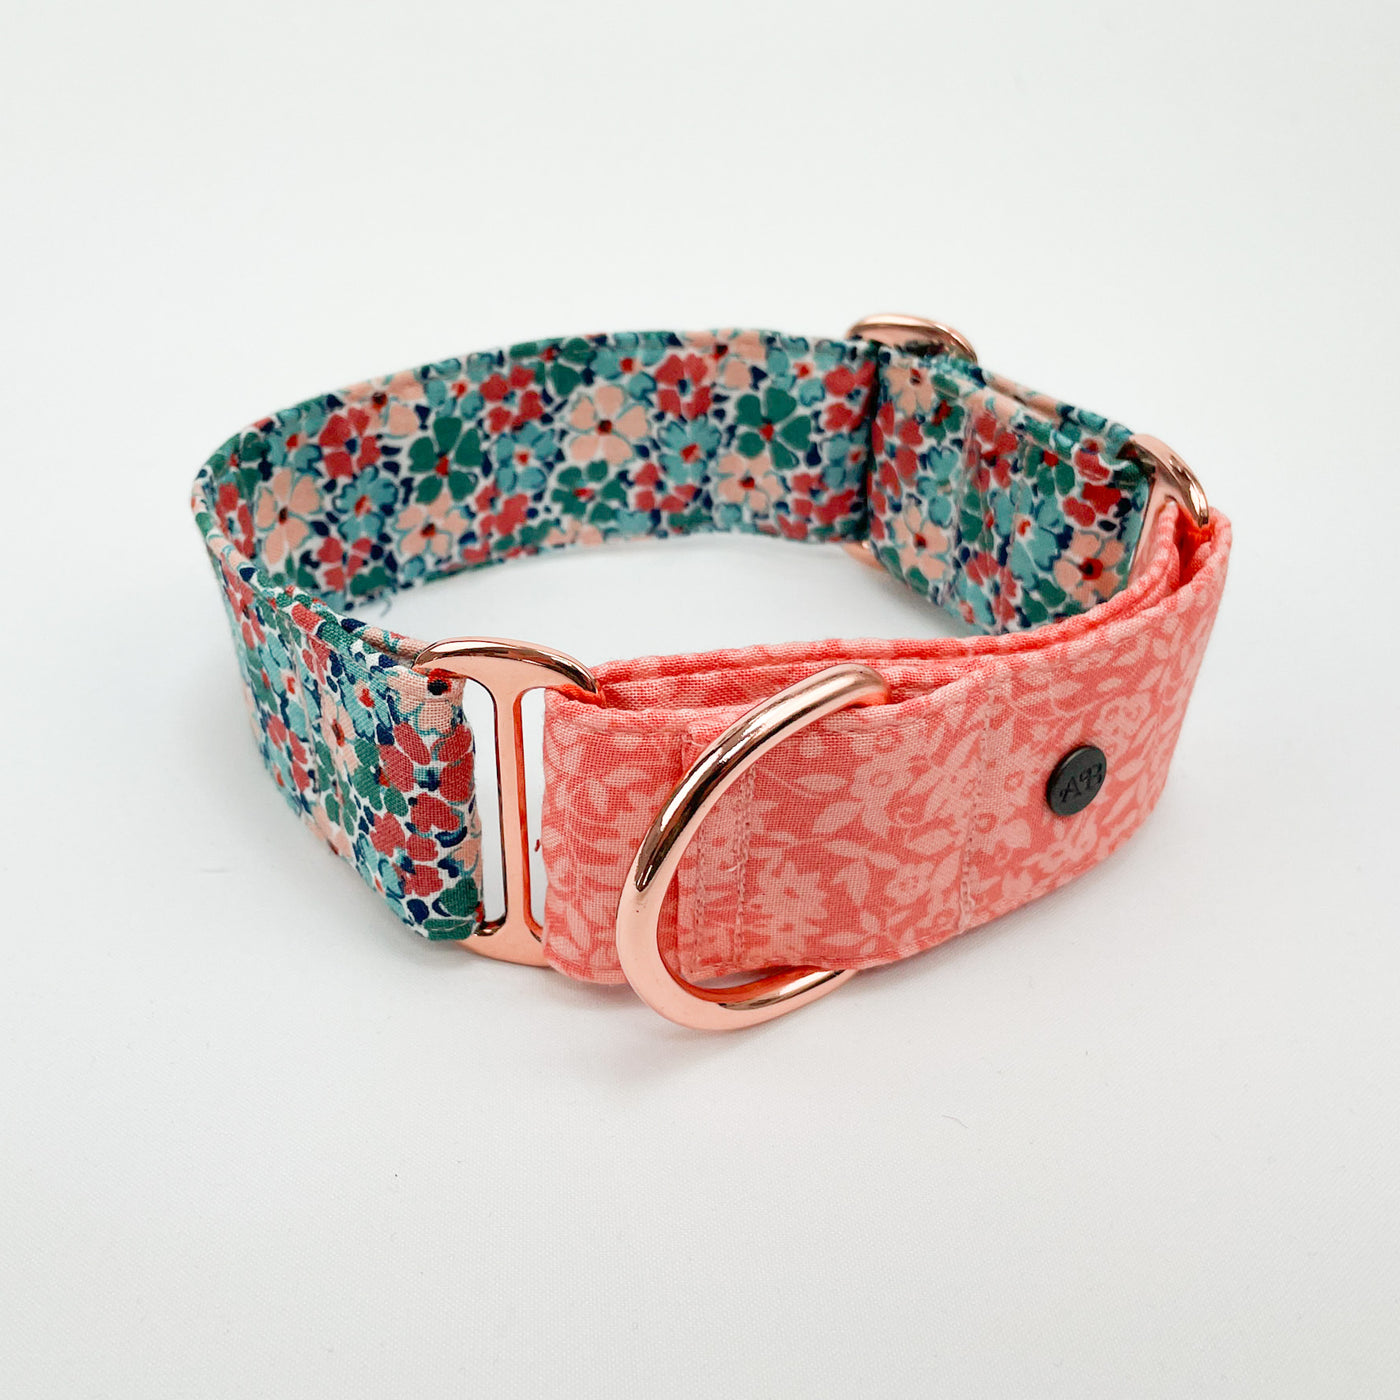 Albies boutique Liberty peach floral and winter floral martingale collar 